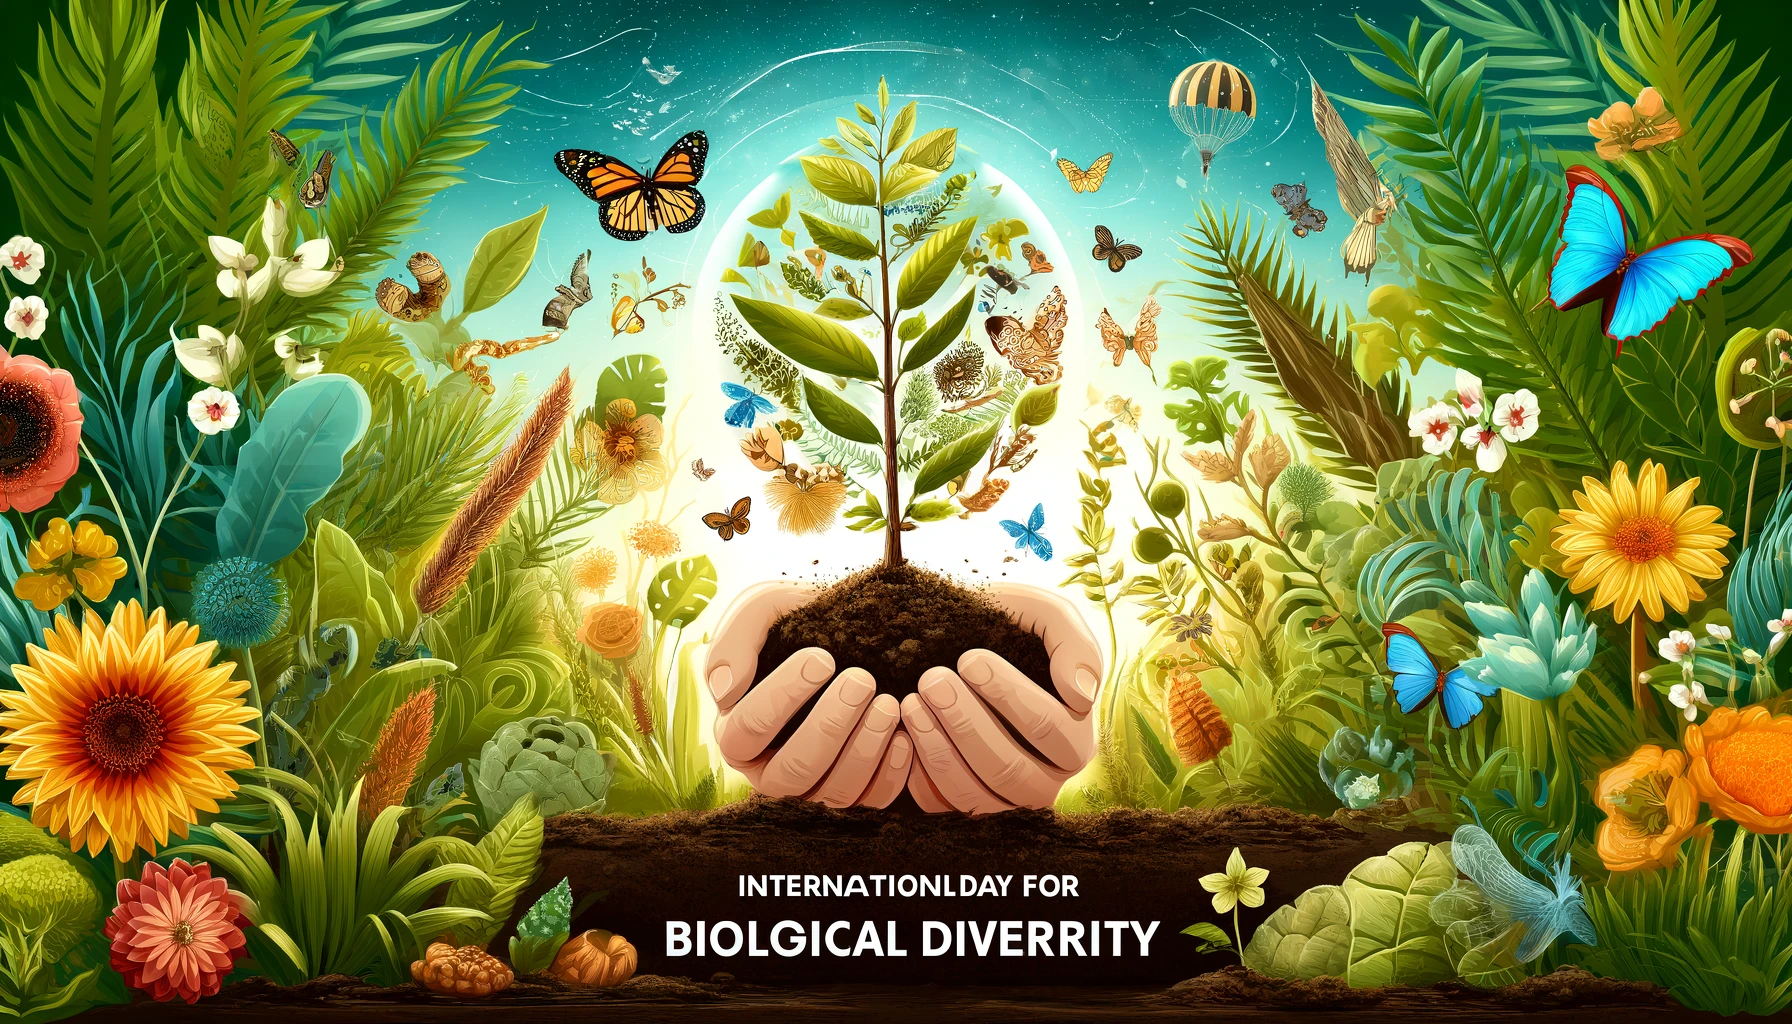 Good Morning Messages on Biodiversity Day